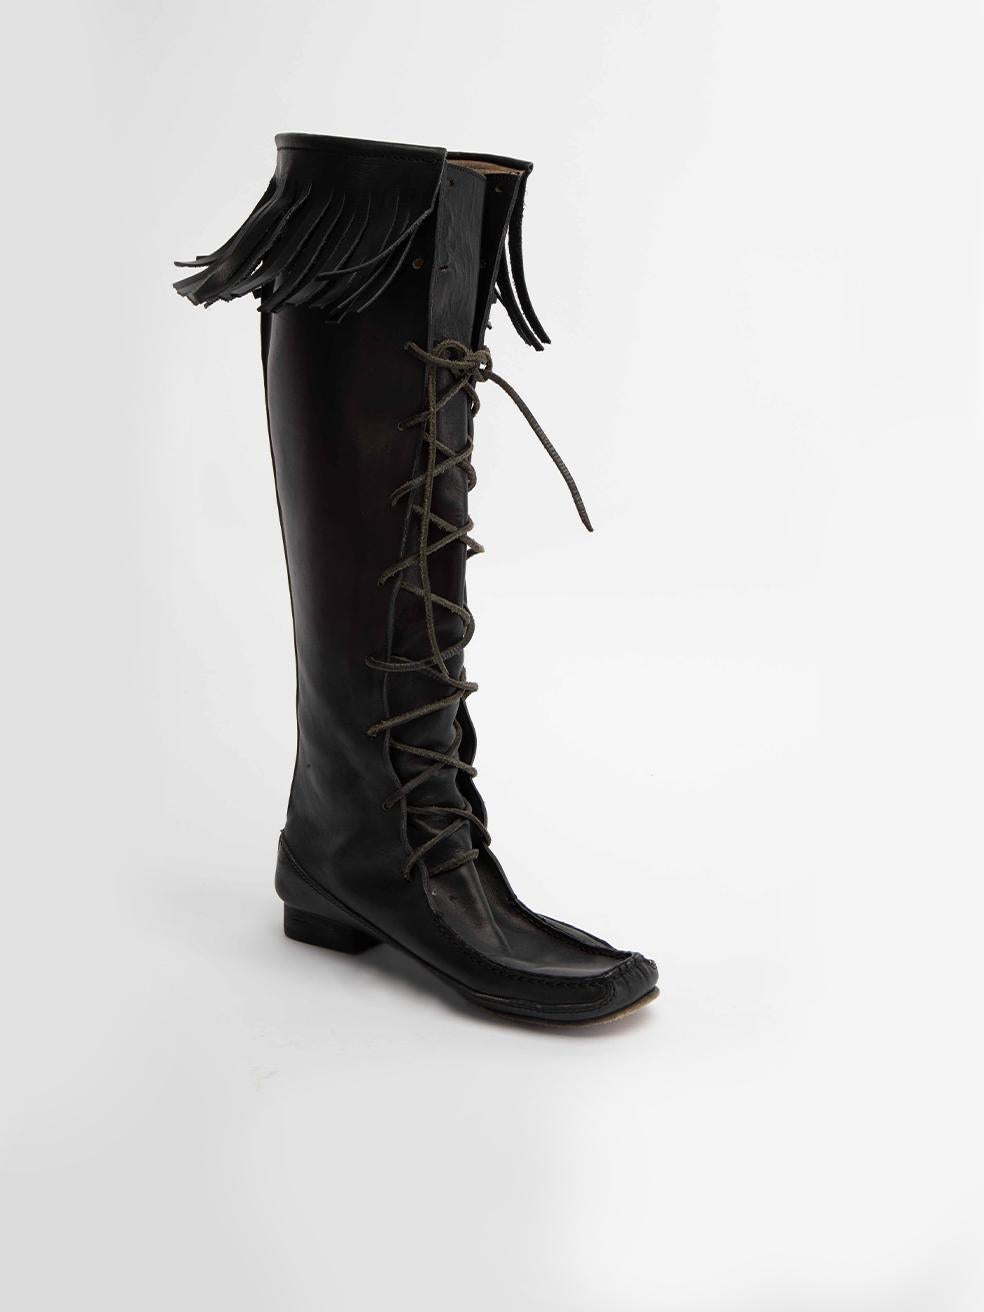 CONDITION is Very good. Minimal wear to shoes is evident. Light creasing to leather material and pilling to laces on this used Gucci designer resale item. 
 
 Details
  Black
 Leather
 Knee high boots
 Square toe
 Kitten block heel
 Lace up closure
